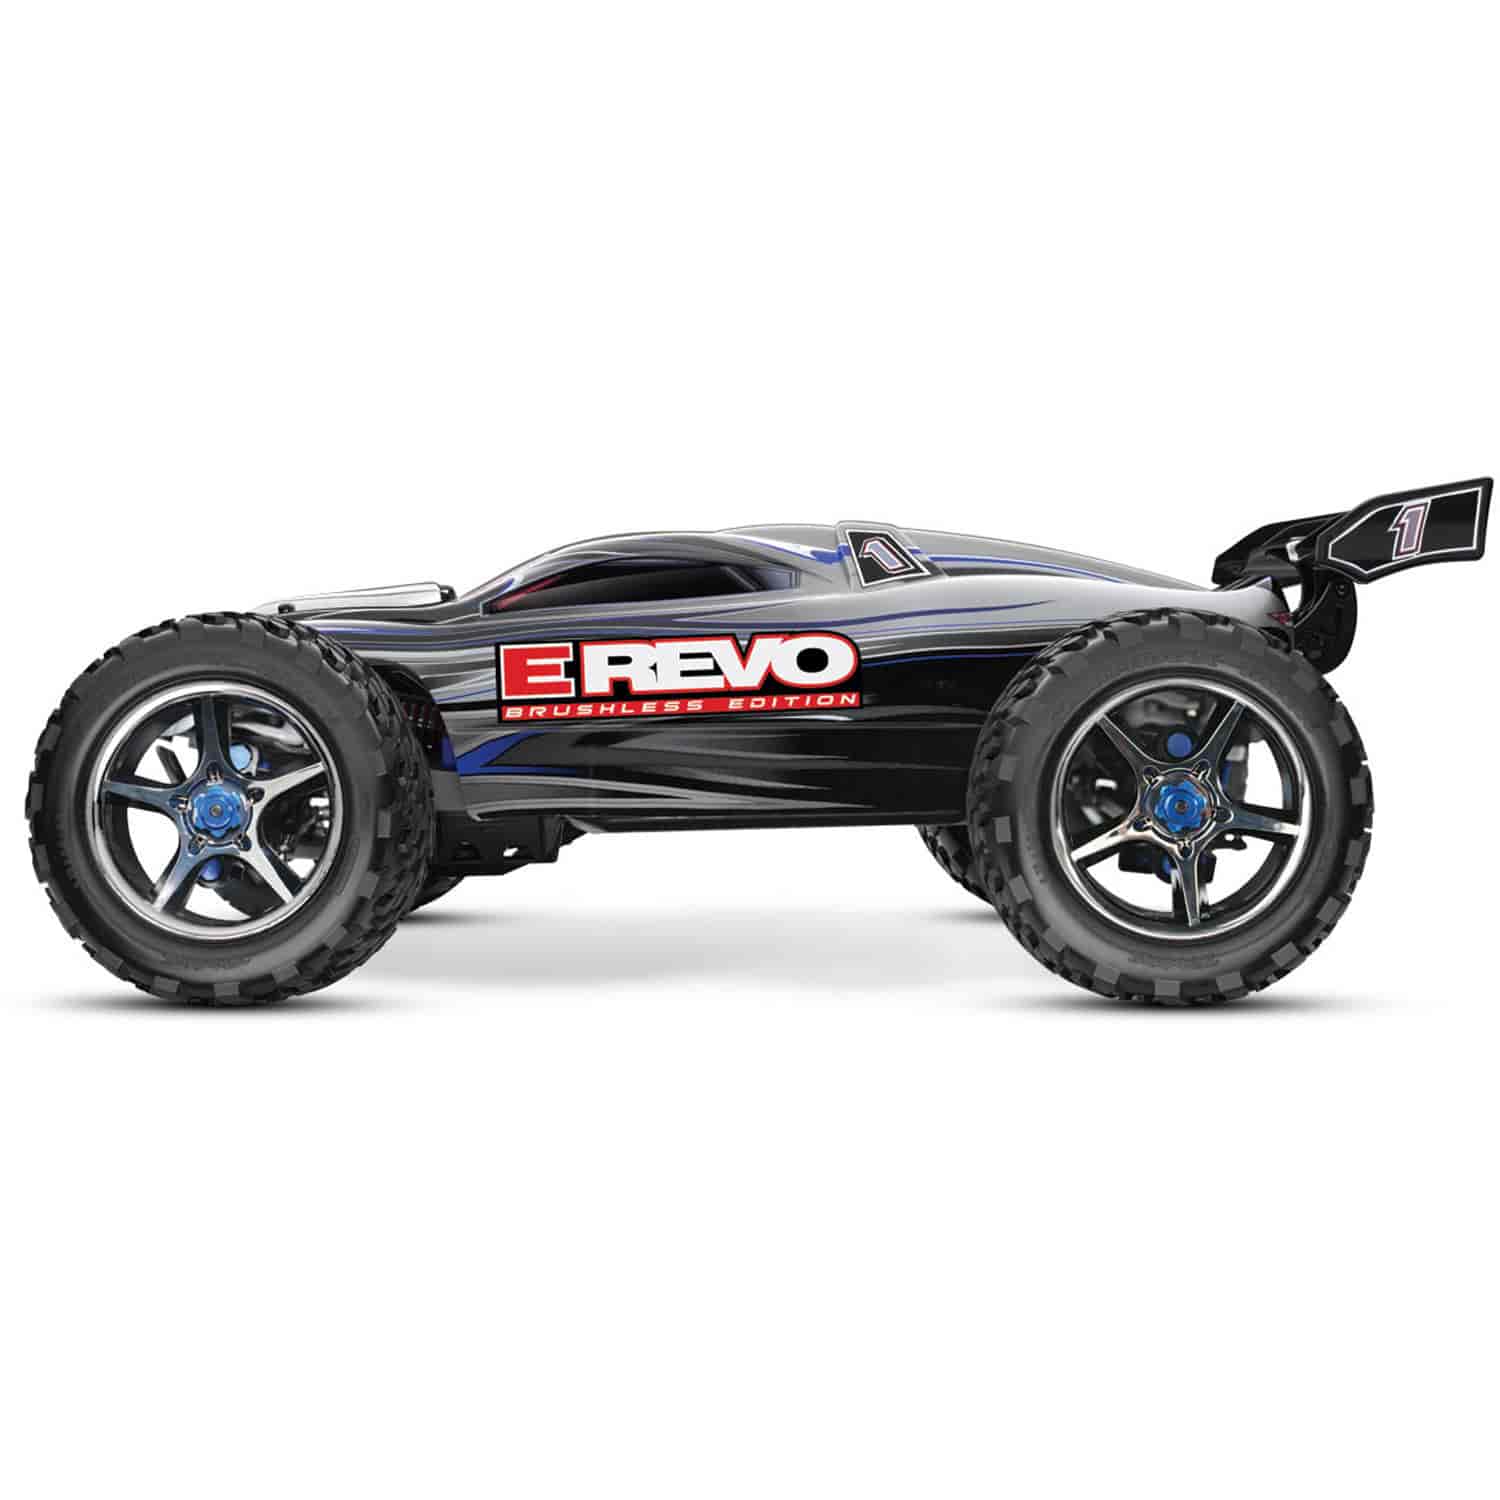 E-Revo Brushless 1/10 Scale 4WD Brushless Electric Racing Monster Truck with TQi 2.4GHz Radio System